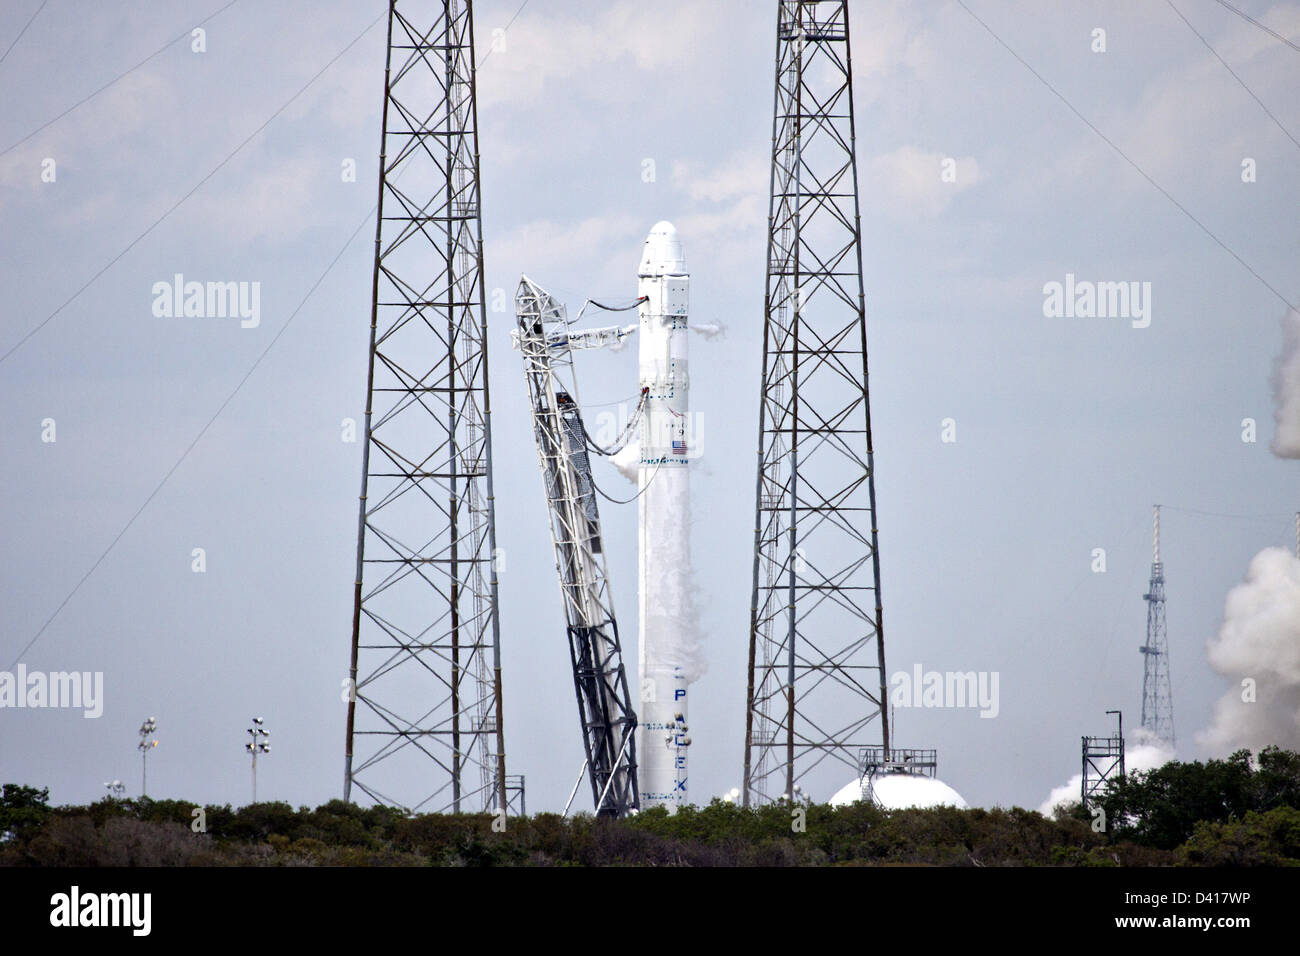 The SpaceX Falcon 9 commercial launch rocket on the launch pad at Launch Complex 40 in preparation for the upcoming SpaceX 2 mission February 28, 2013 at Cape Canaveral, Florida. Stock Photo